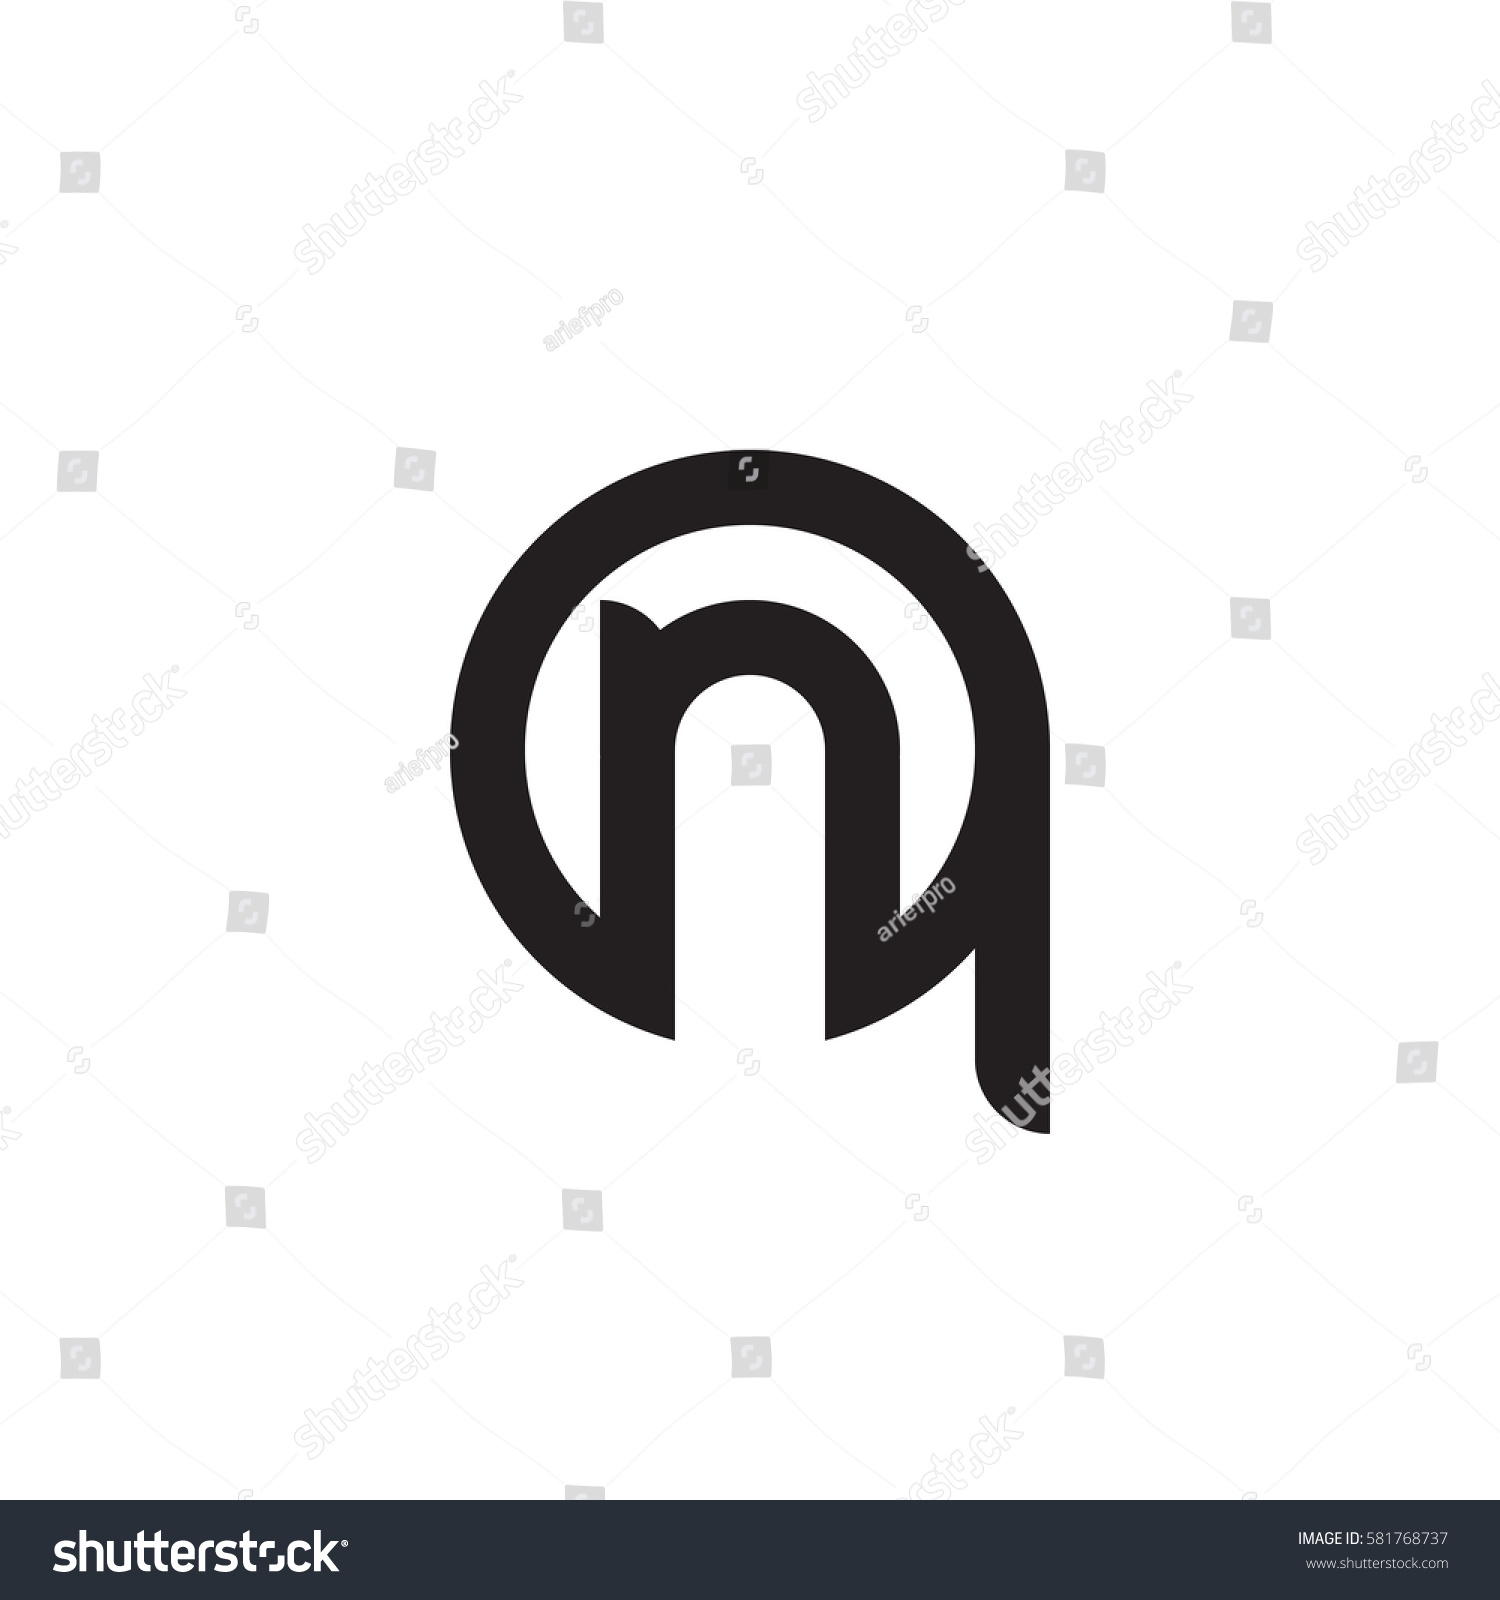 Initial Letter Logo Qn Nq N Stock Vector Royalty Free